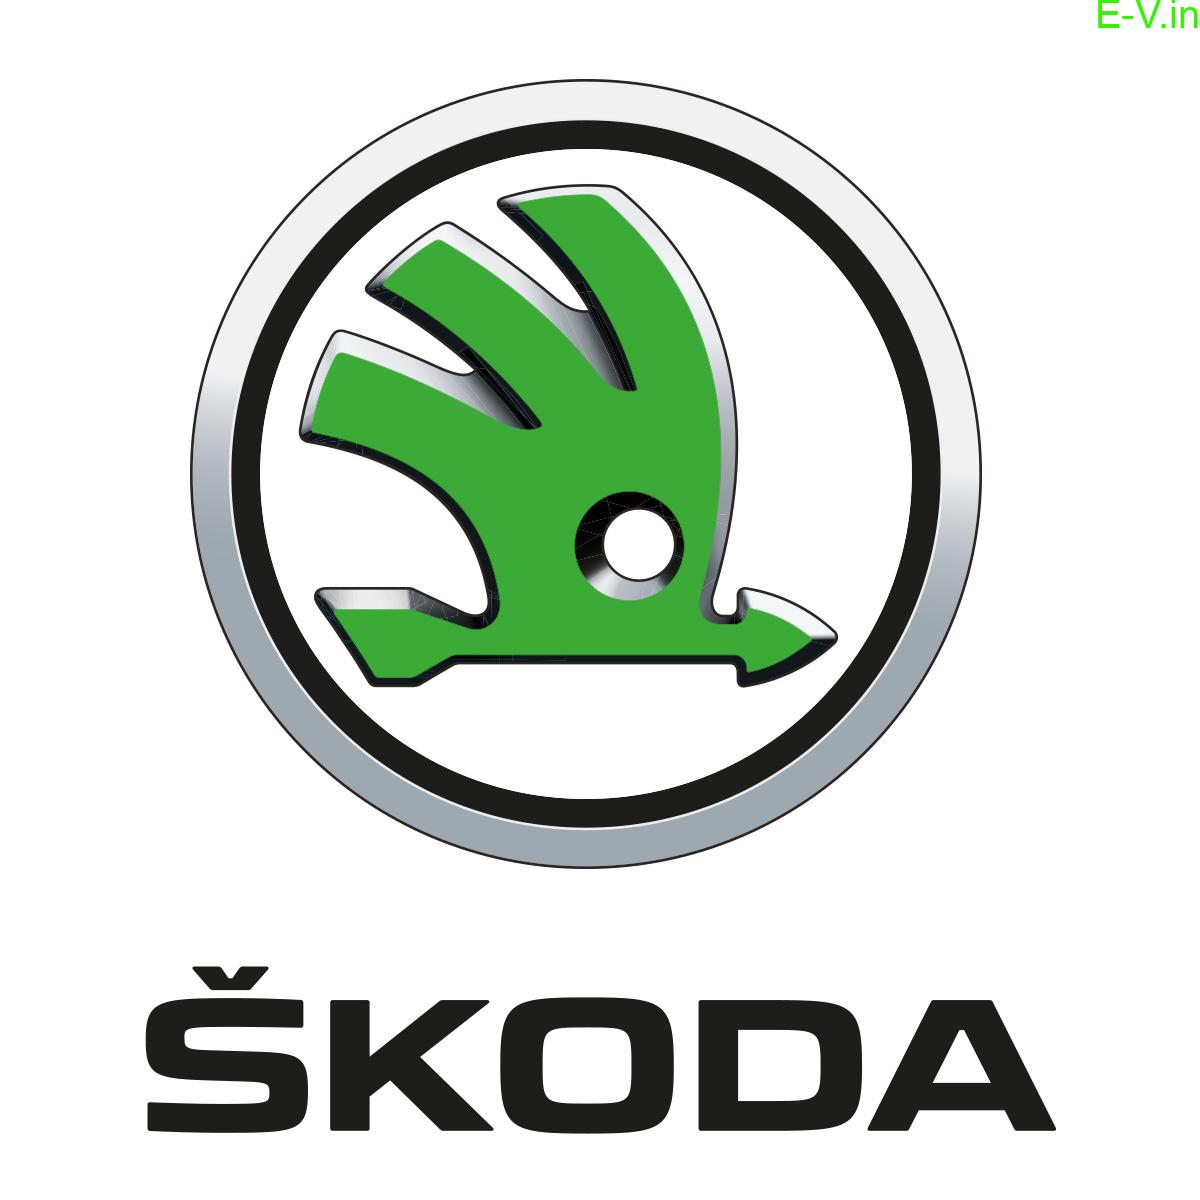 Skoda to set up second life battery